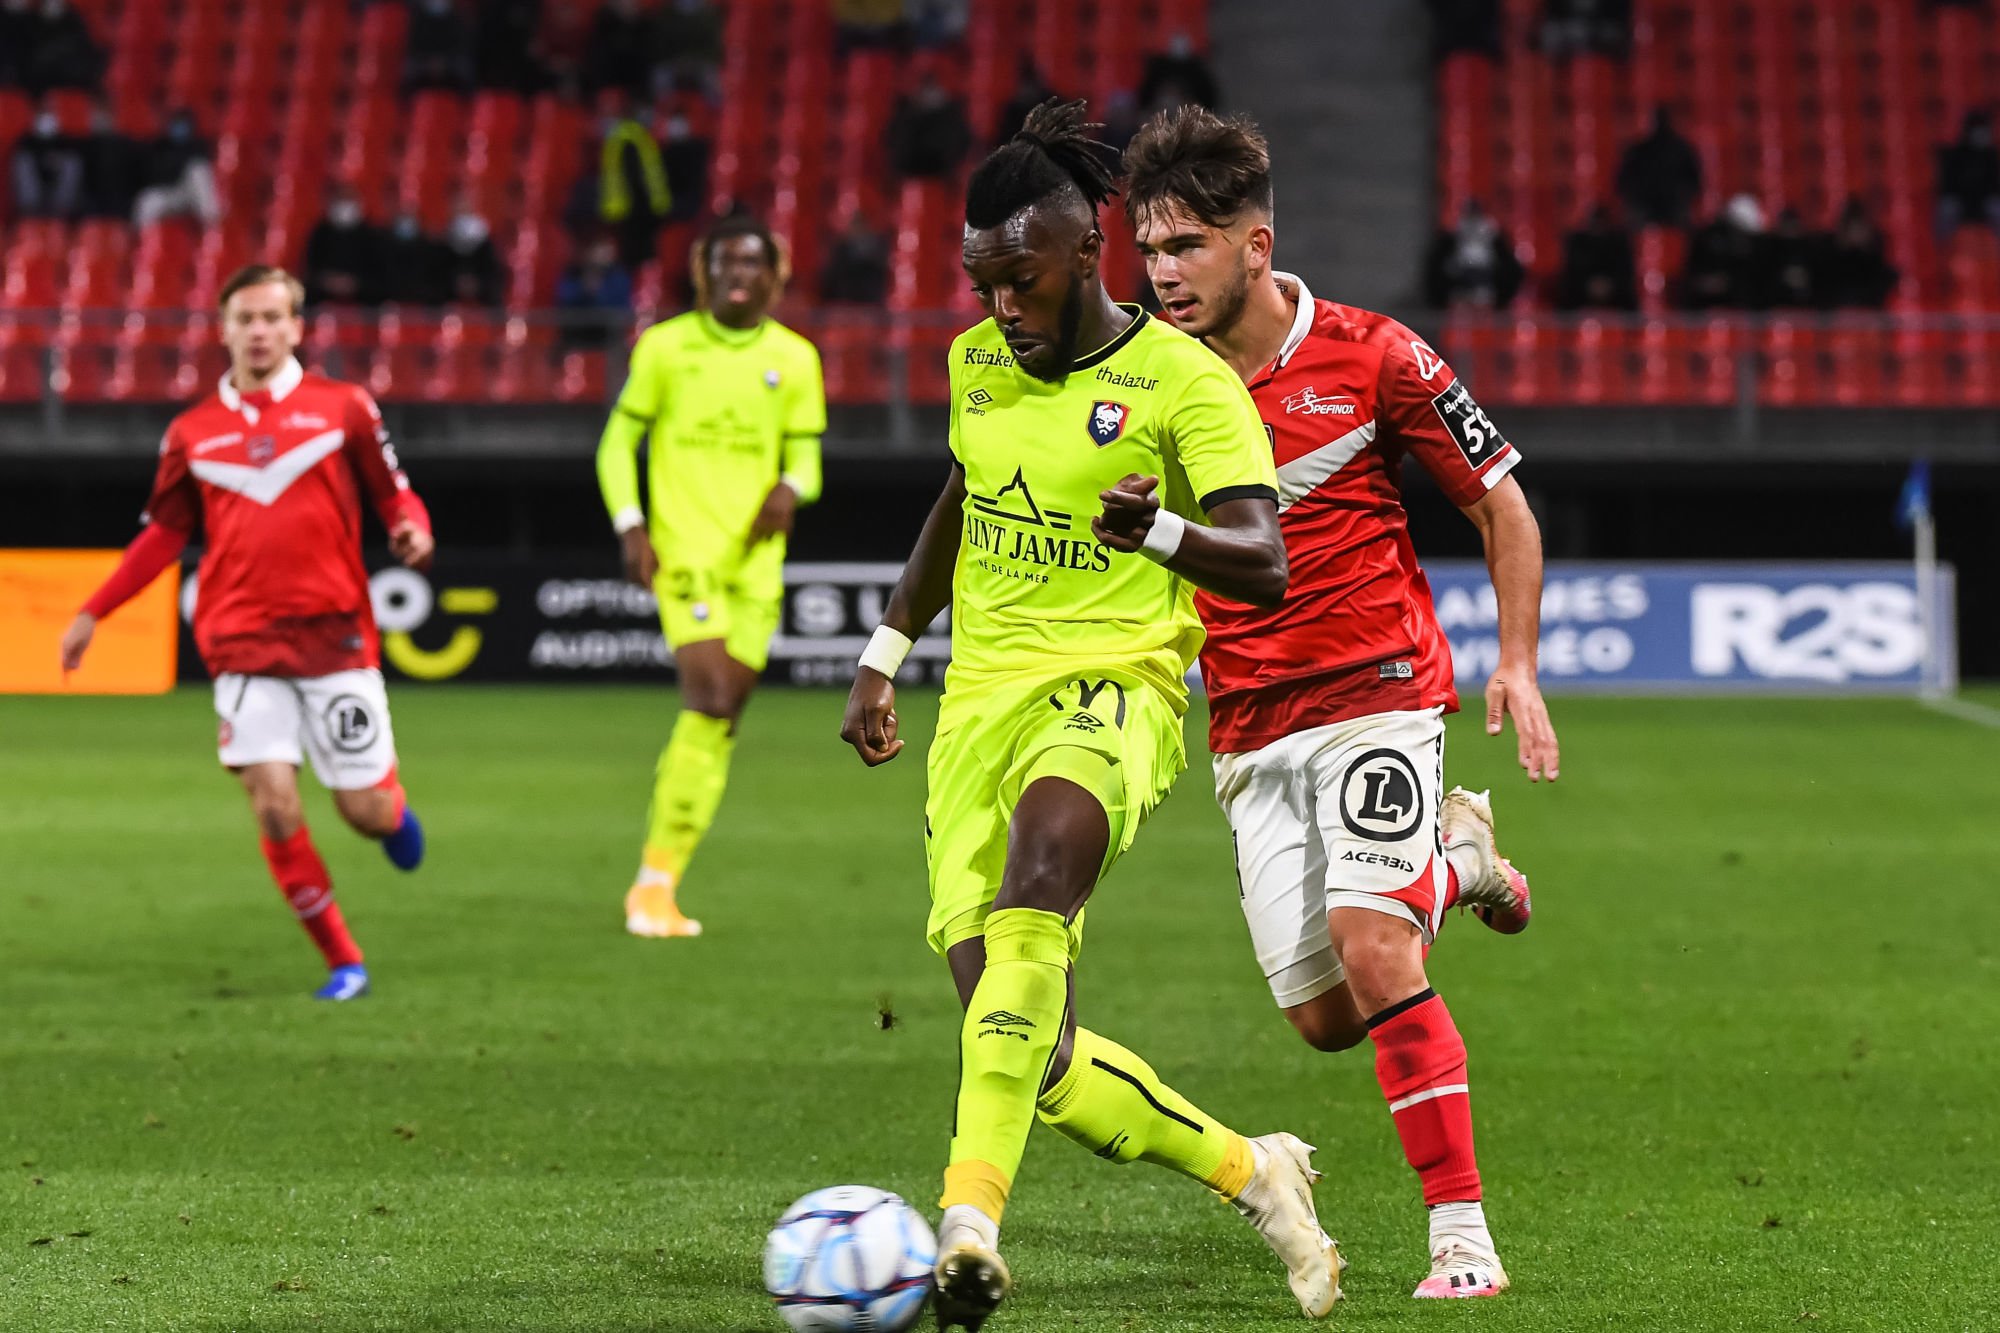 Steeve YAGO of Caen and Noah DILIBERTO of Valenciennes during the French Ligue 2 soccer match between Valenciennes and Caen on September 26, 2020 in Valenciennes, France. (Photo by Baptiste Fernandez/Icon Sport) - Steeve YAGO - Noah DILIBERTO - Stade du Hainaut - Valenciennes (France)